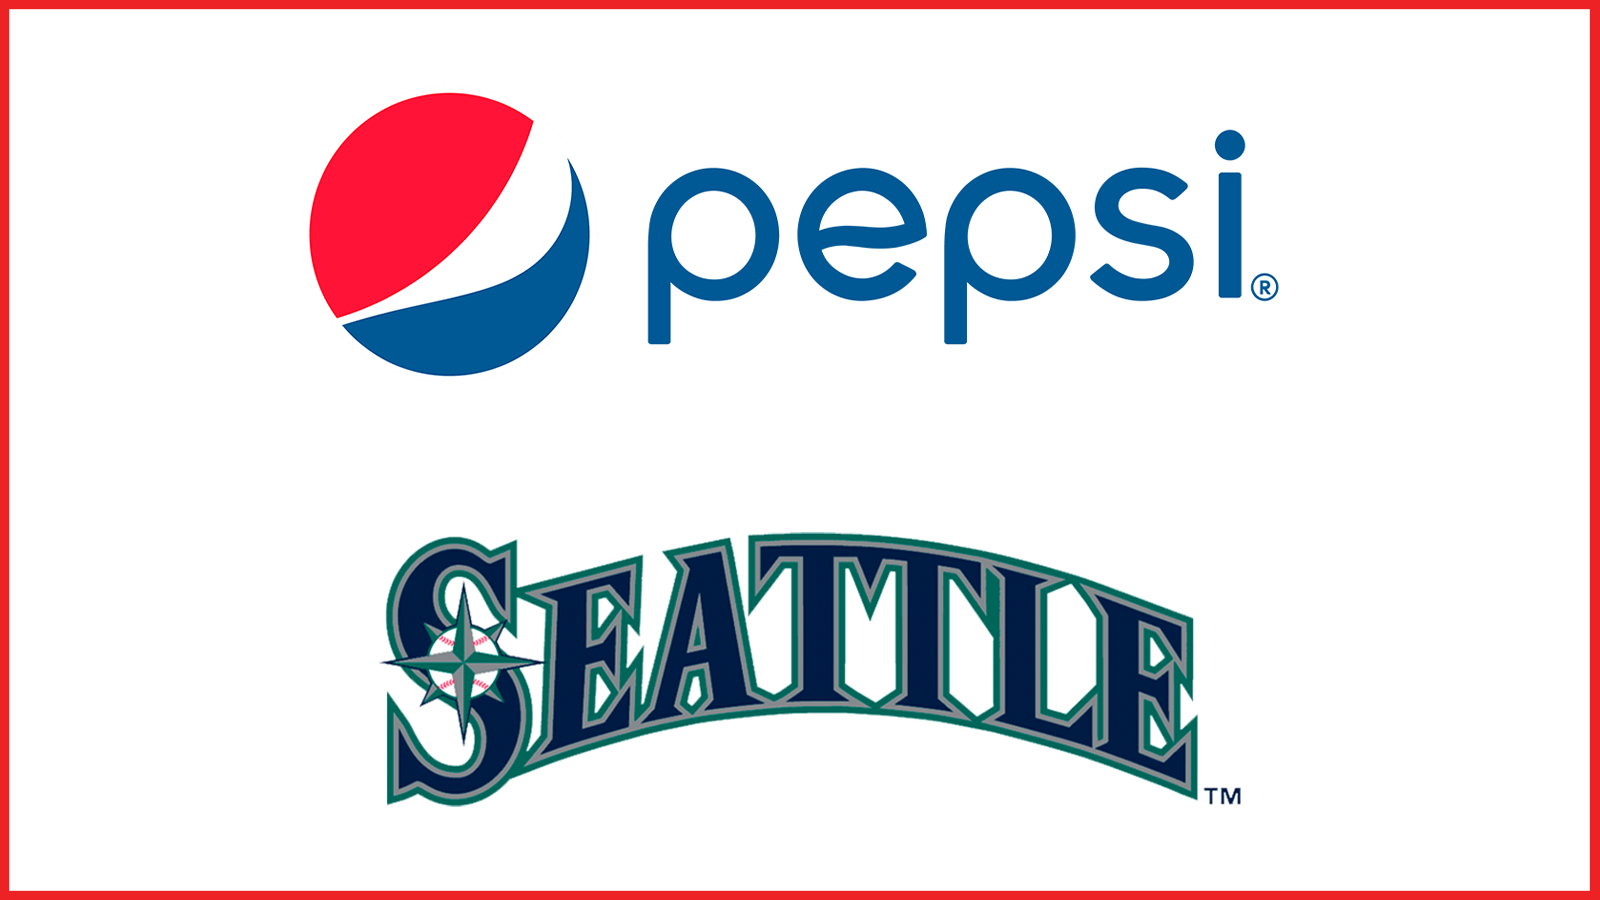 pepsi and seattle mariner logos, with red border